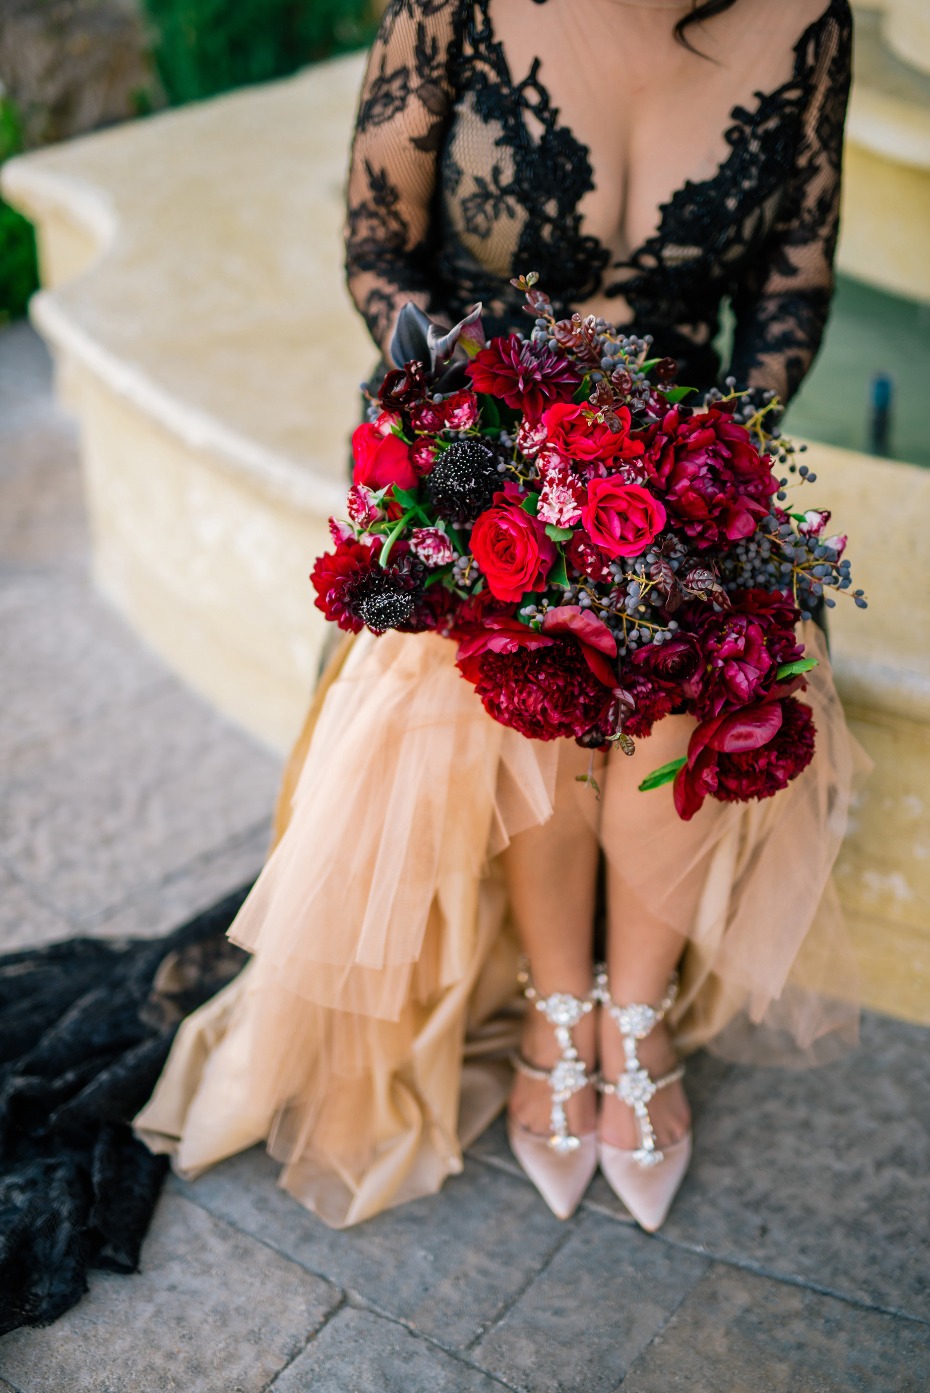 Gorgeous jewel toned bouquet and sparkly heels